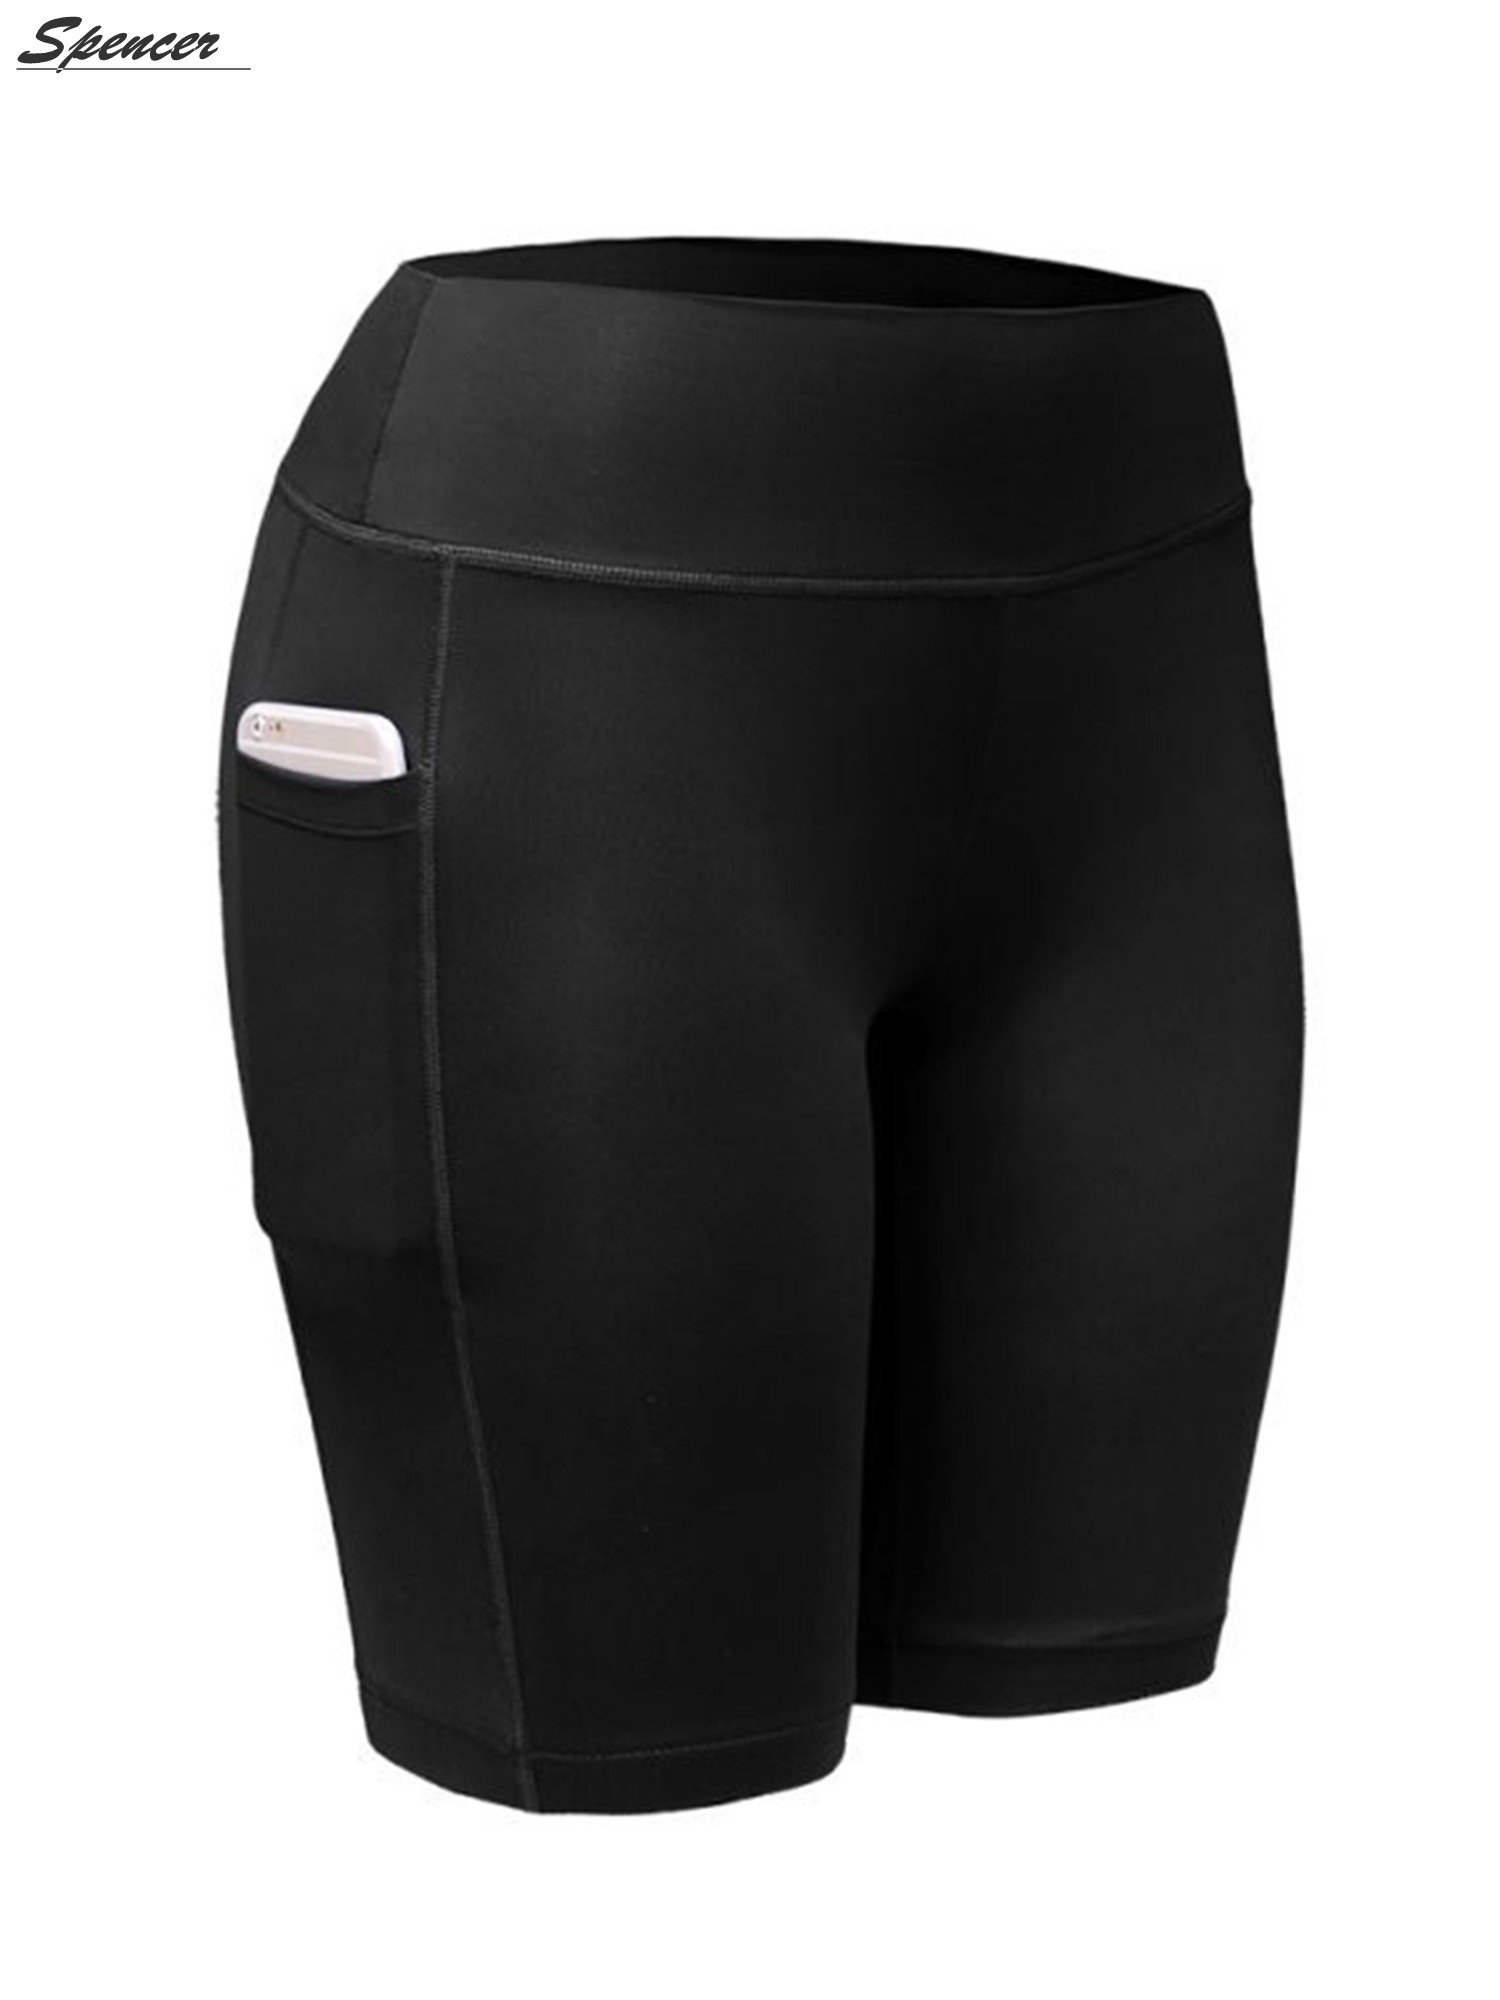 Spencer Womens High Waist Yoga Shorts with Side Pockets Tummy Control Workout 4 Way Stretch Yoga Leggings "M, Black" - image 3 of 9